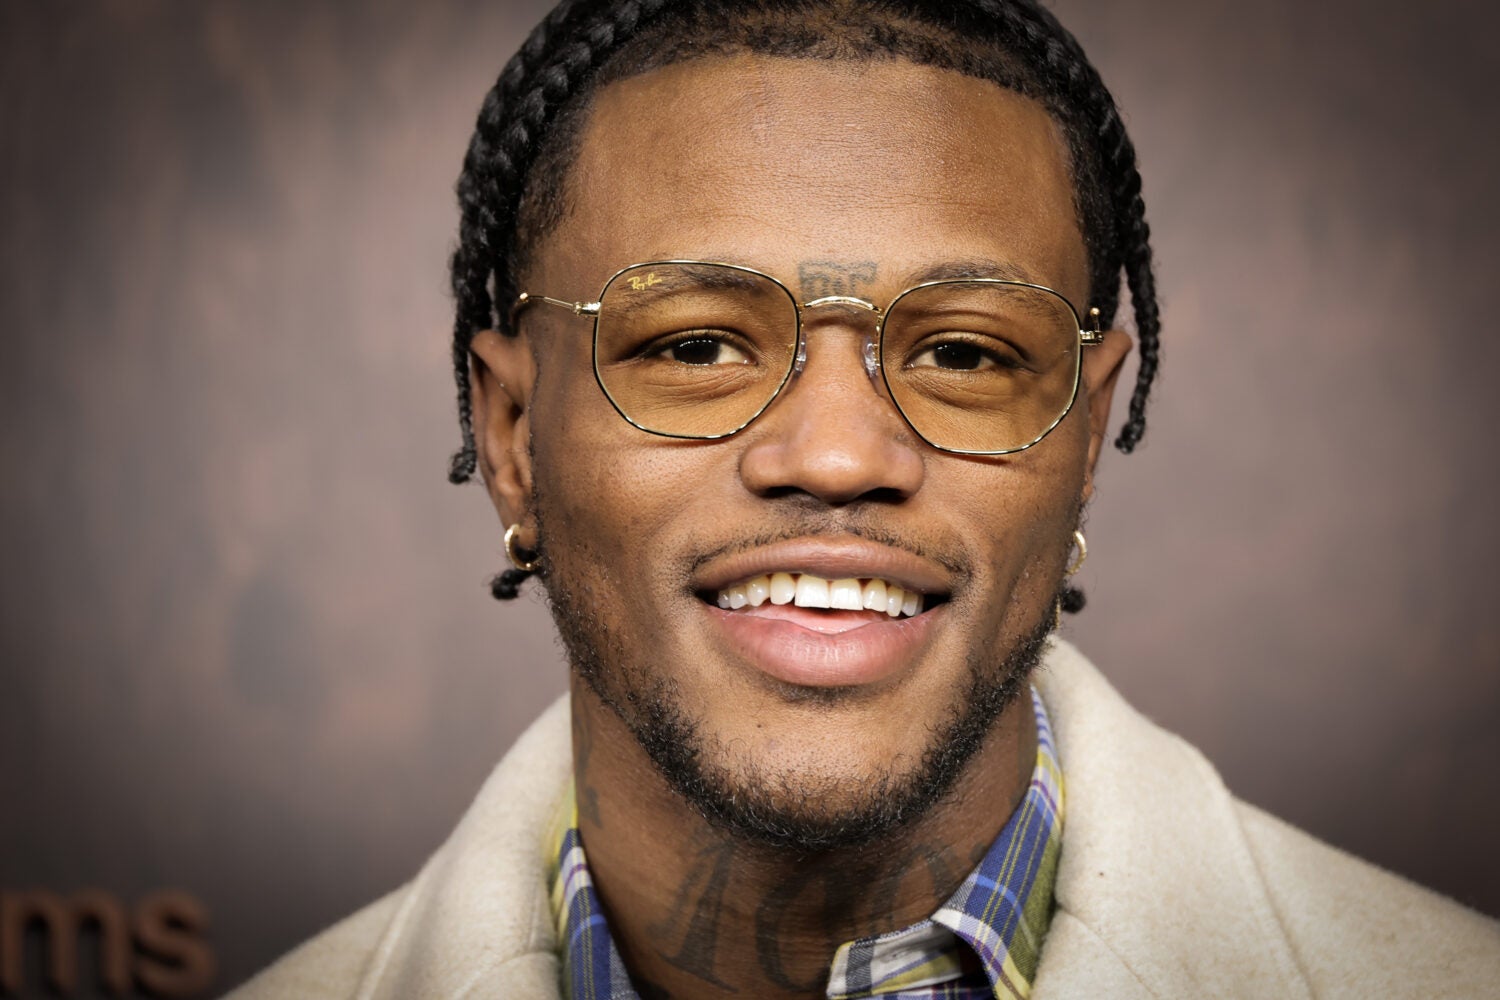 DC Young Fly Shines As The New Host Of VH1’s ‘Celebrity Squares’